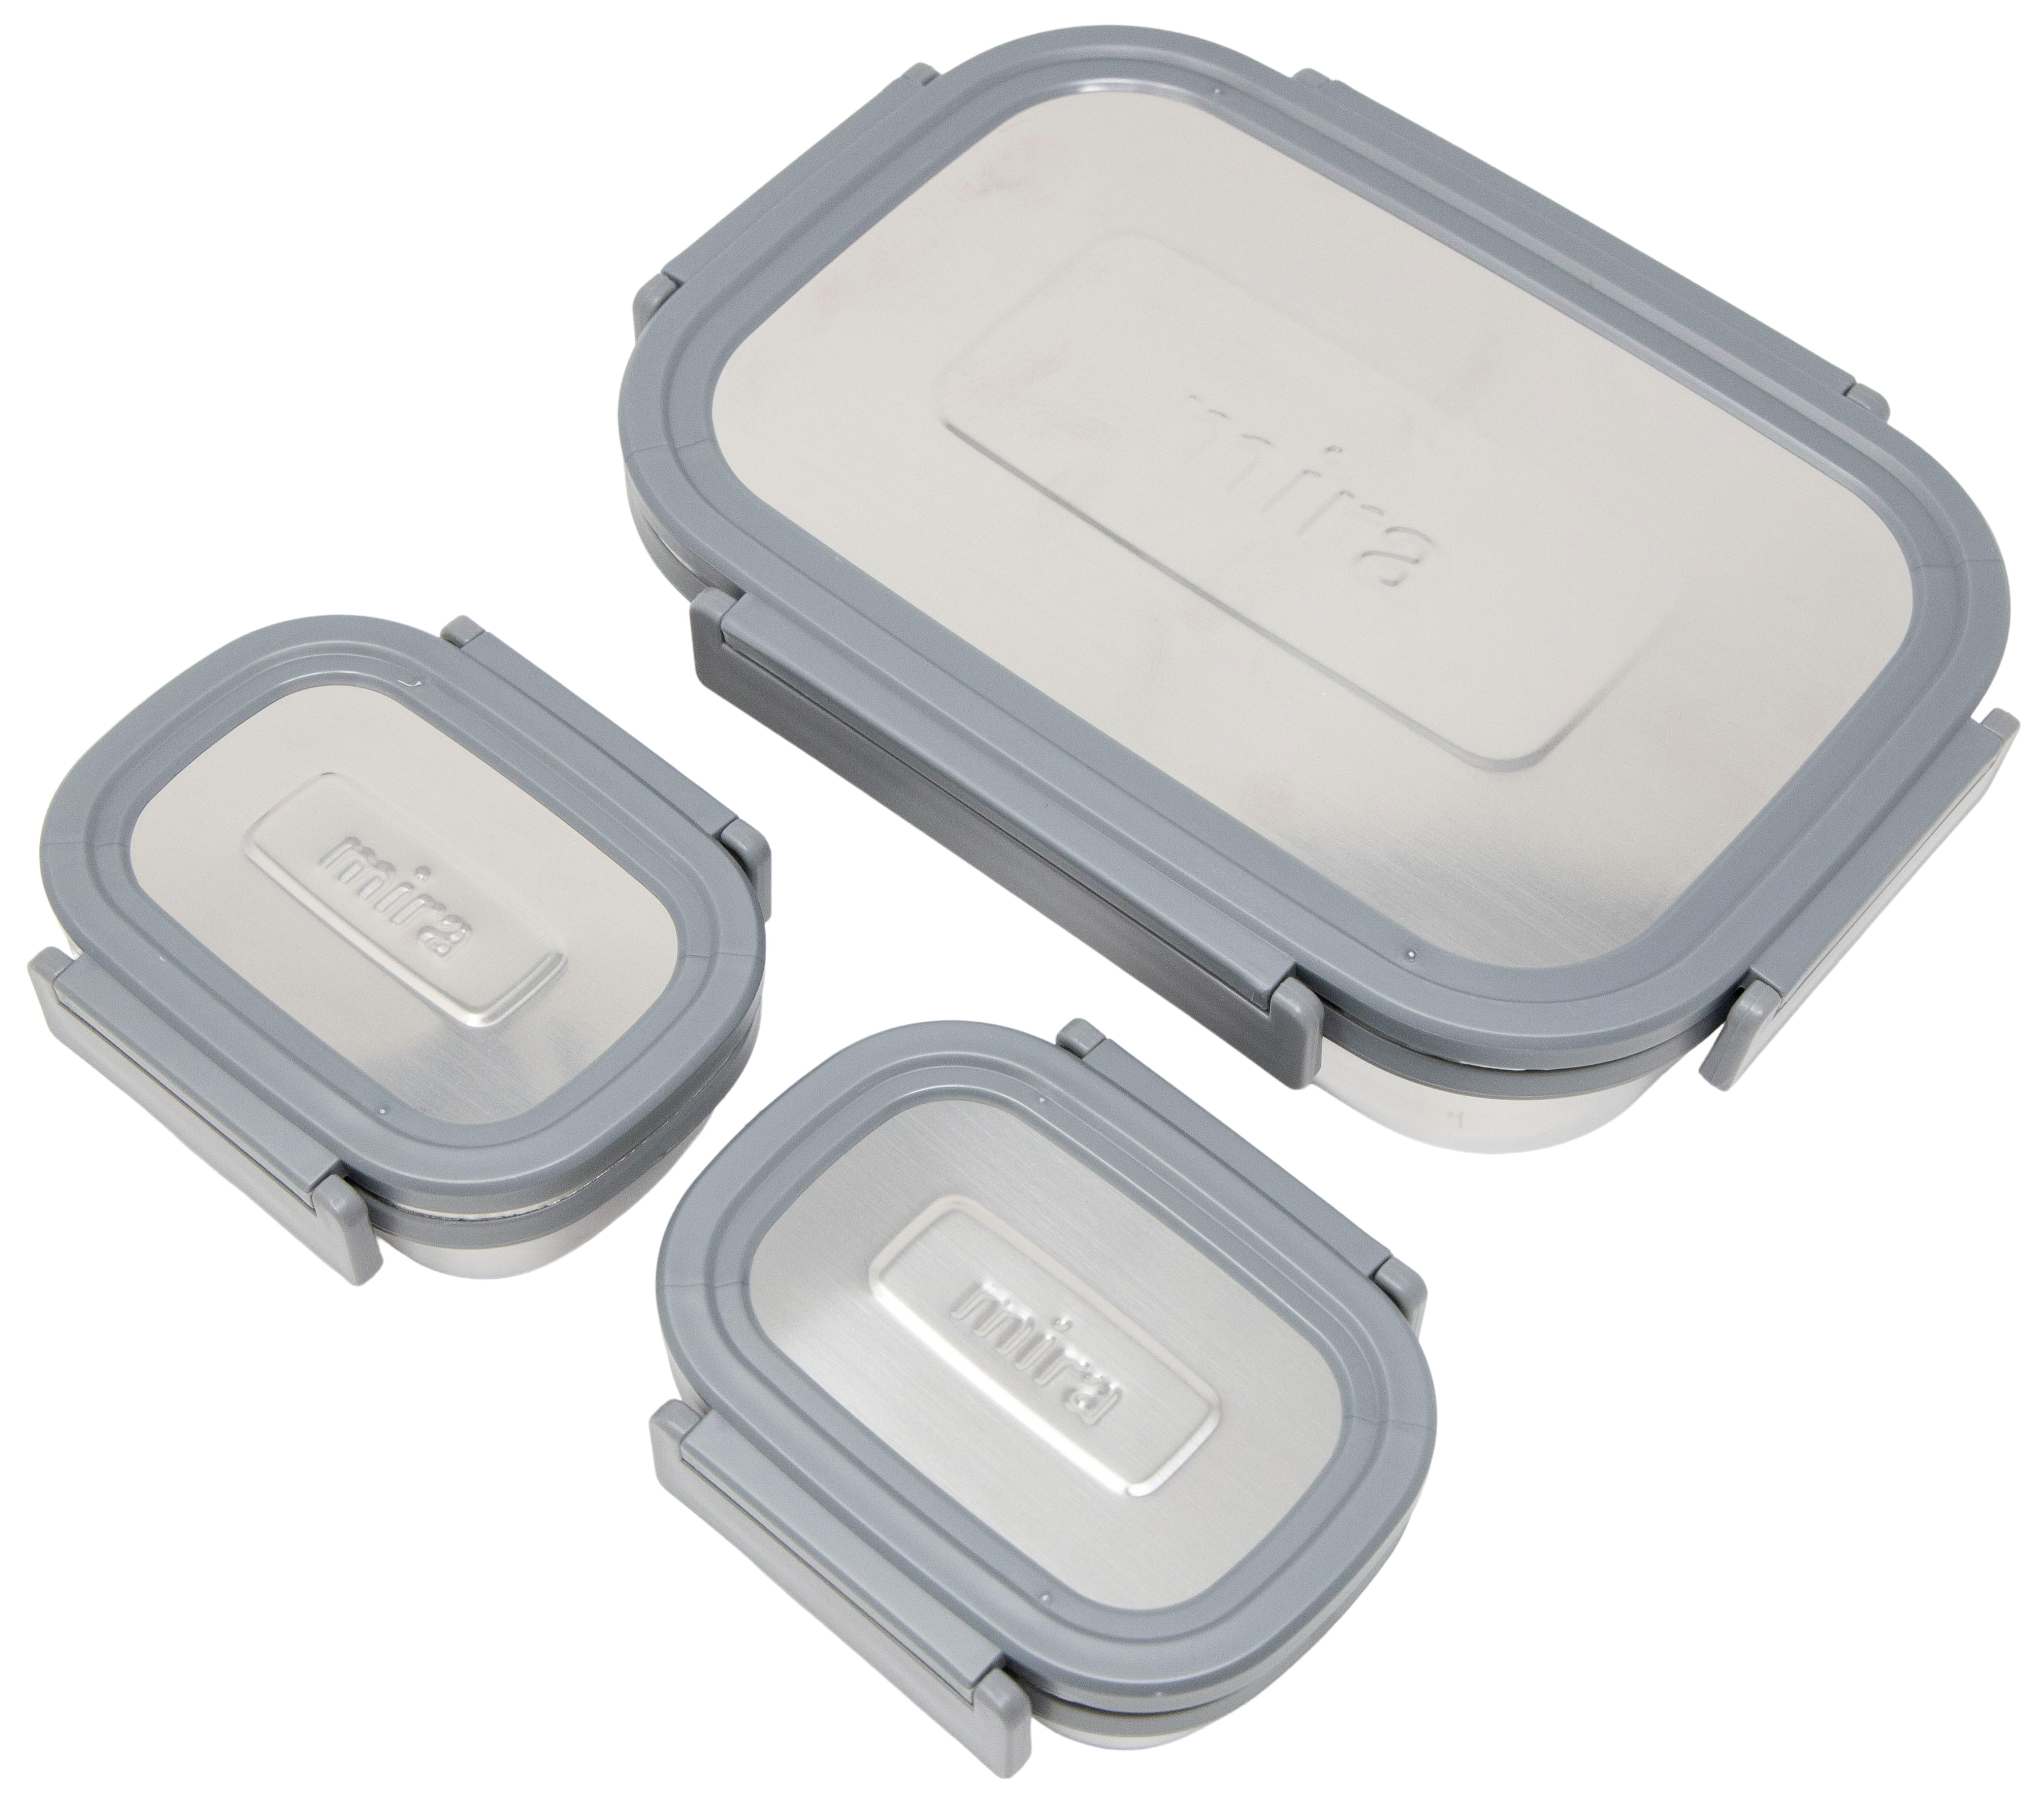 MIRA 20oz Stainless Steel Lunch Container with Two 6oz Snack